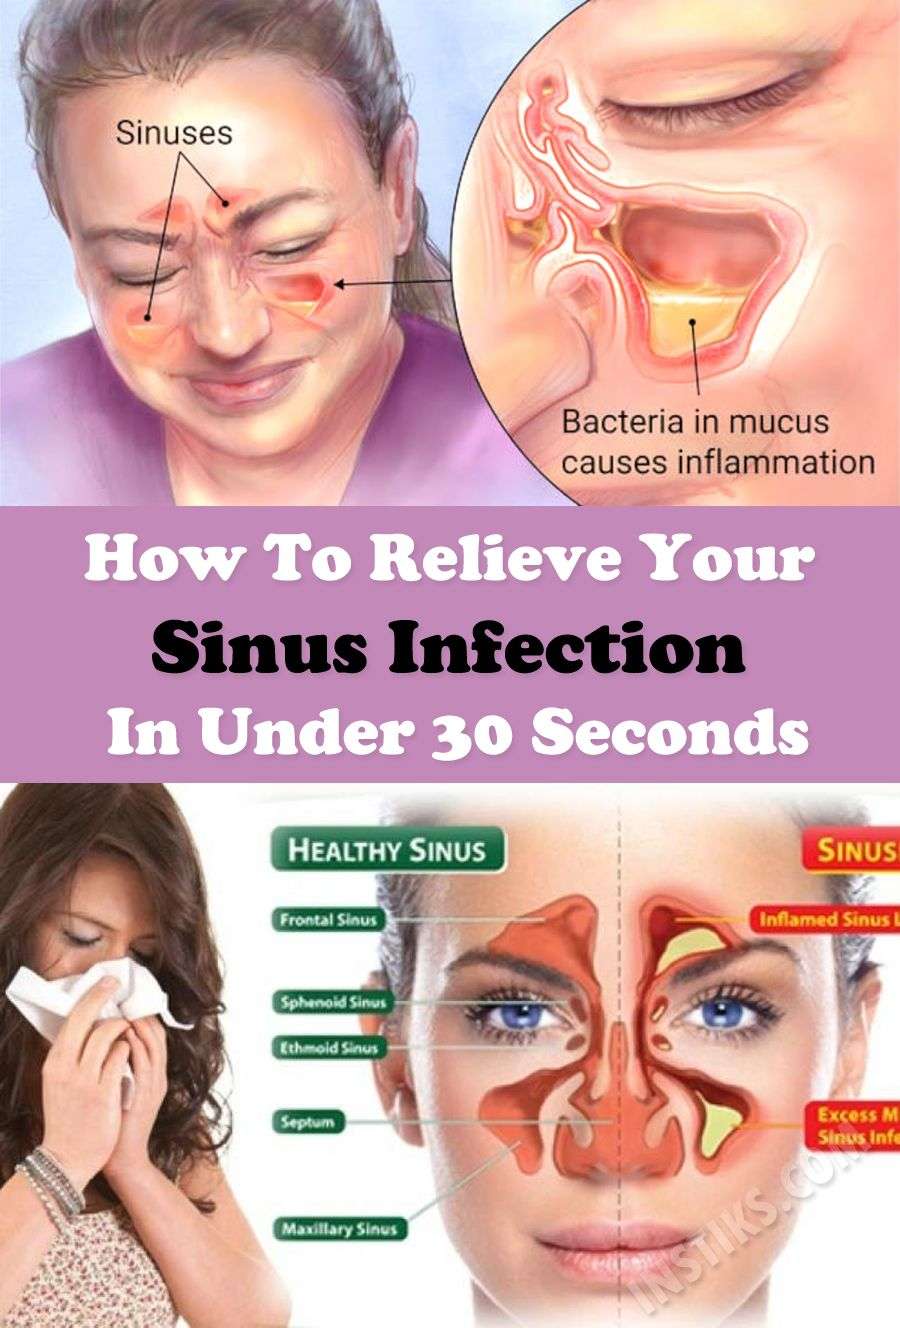 How To Get Over A Sinus Infection In 24 Hours